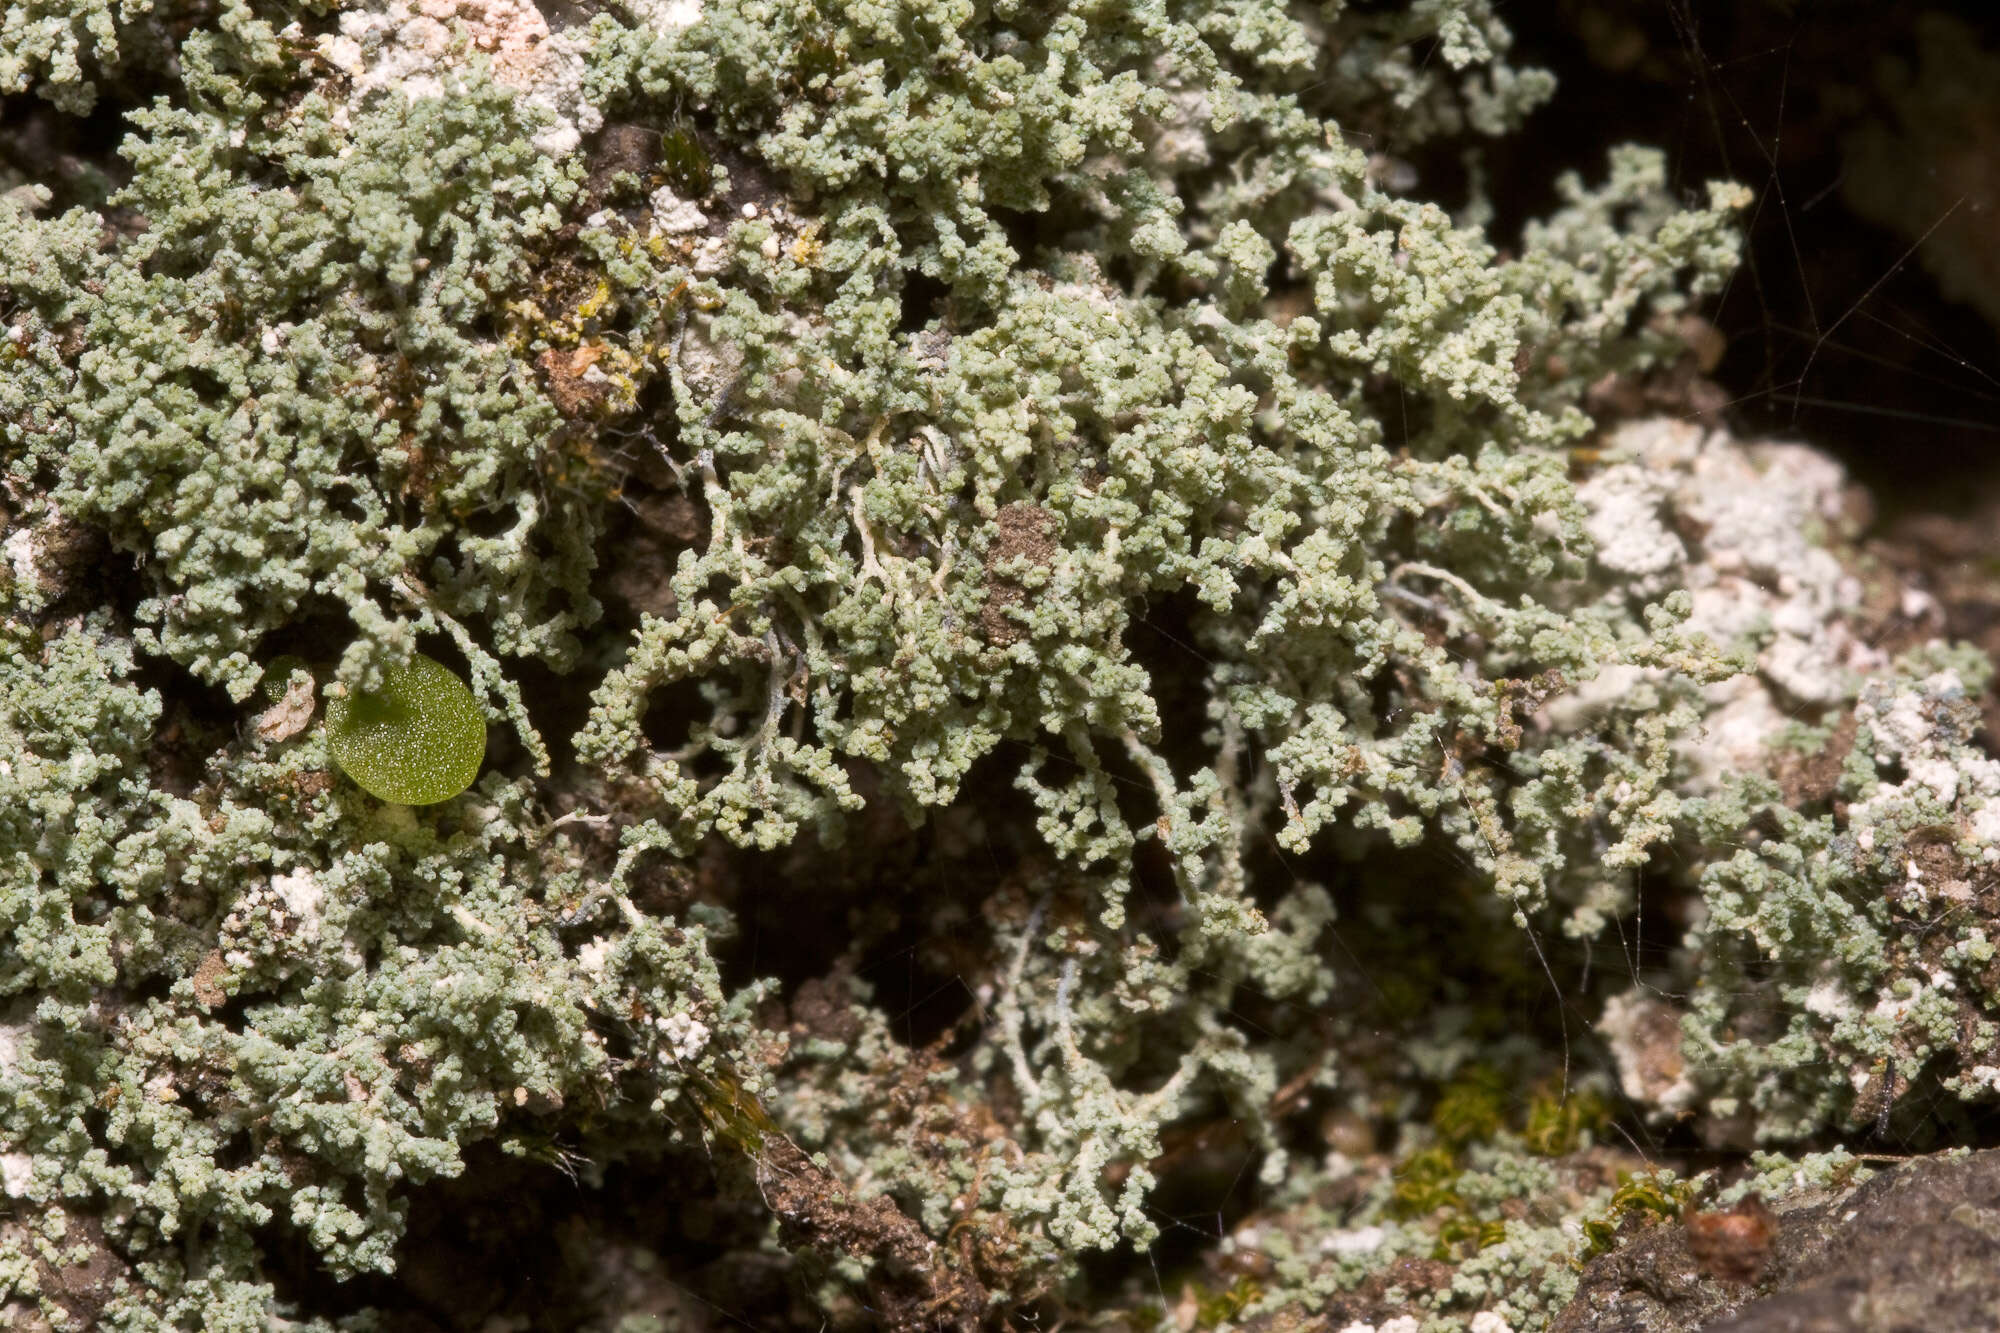 Image of Cottonthread lichens